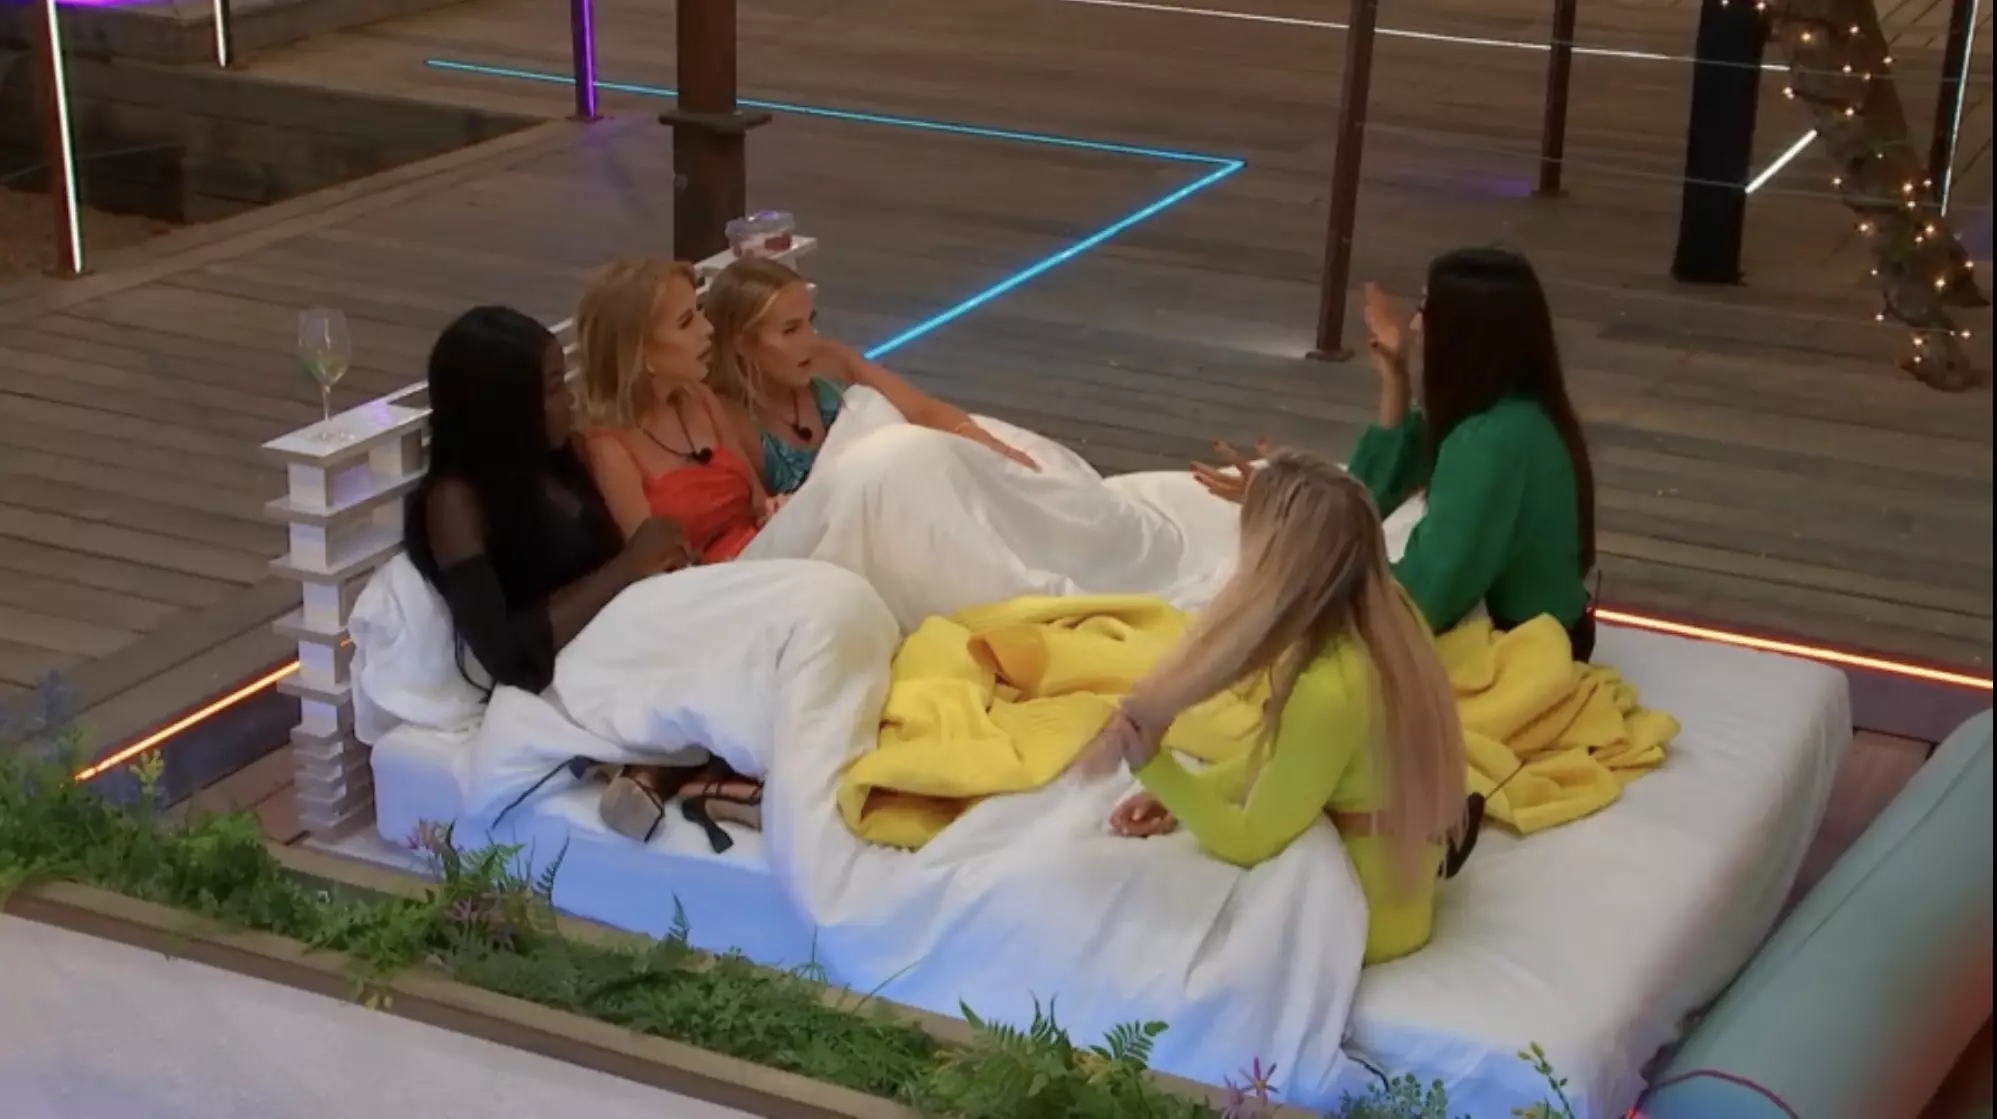 The girls were on the daybed discussing stars when Priya made the remark (